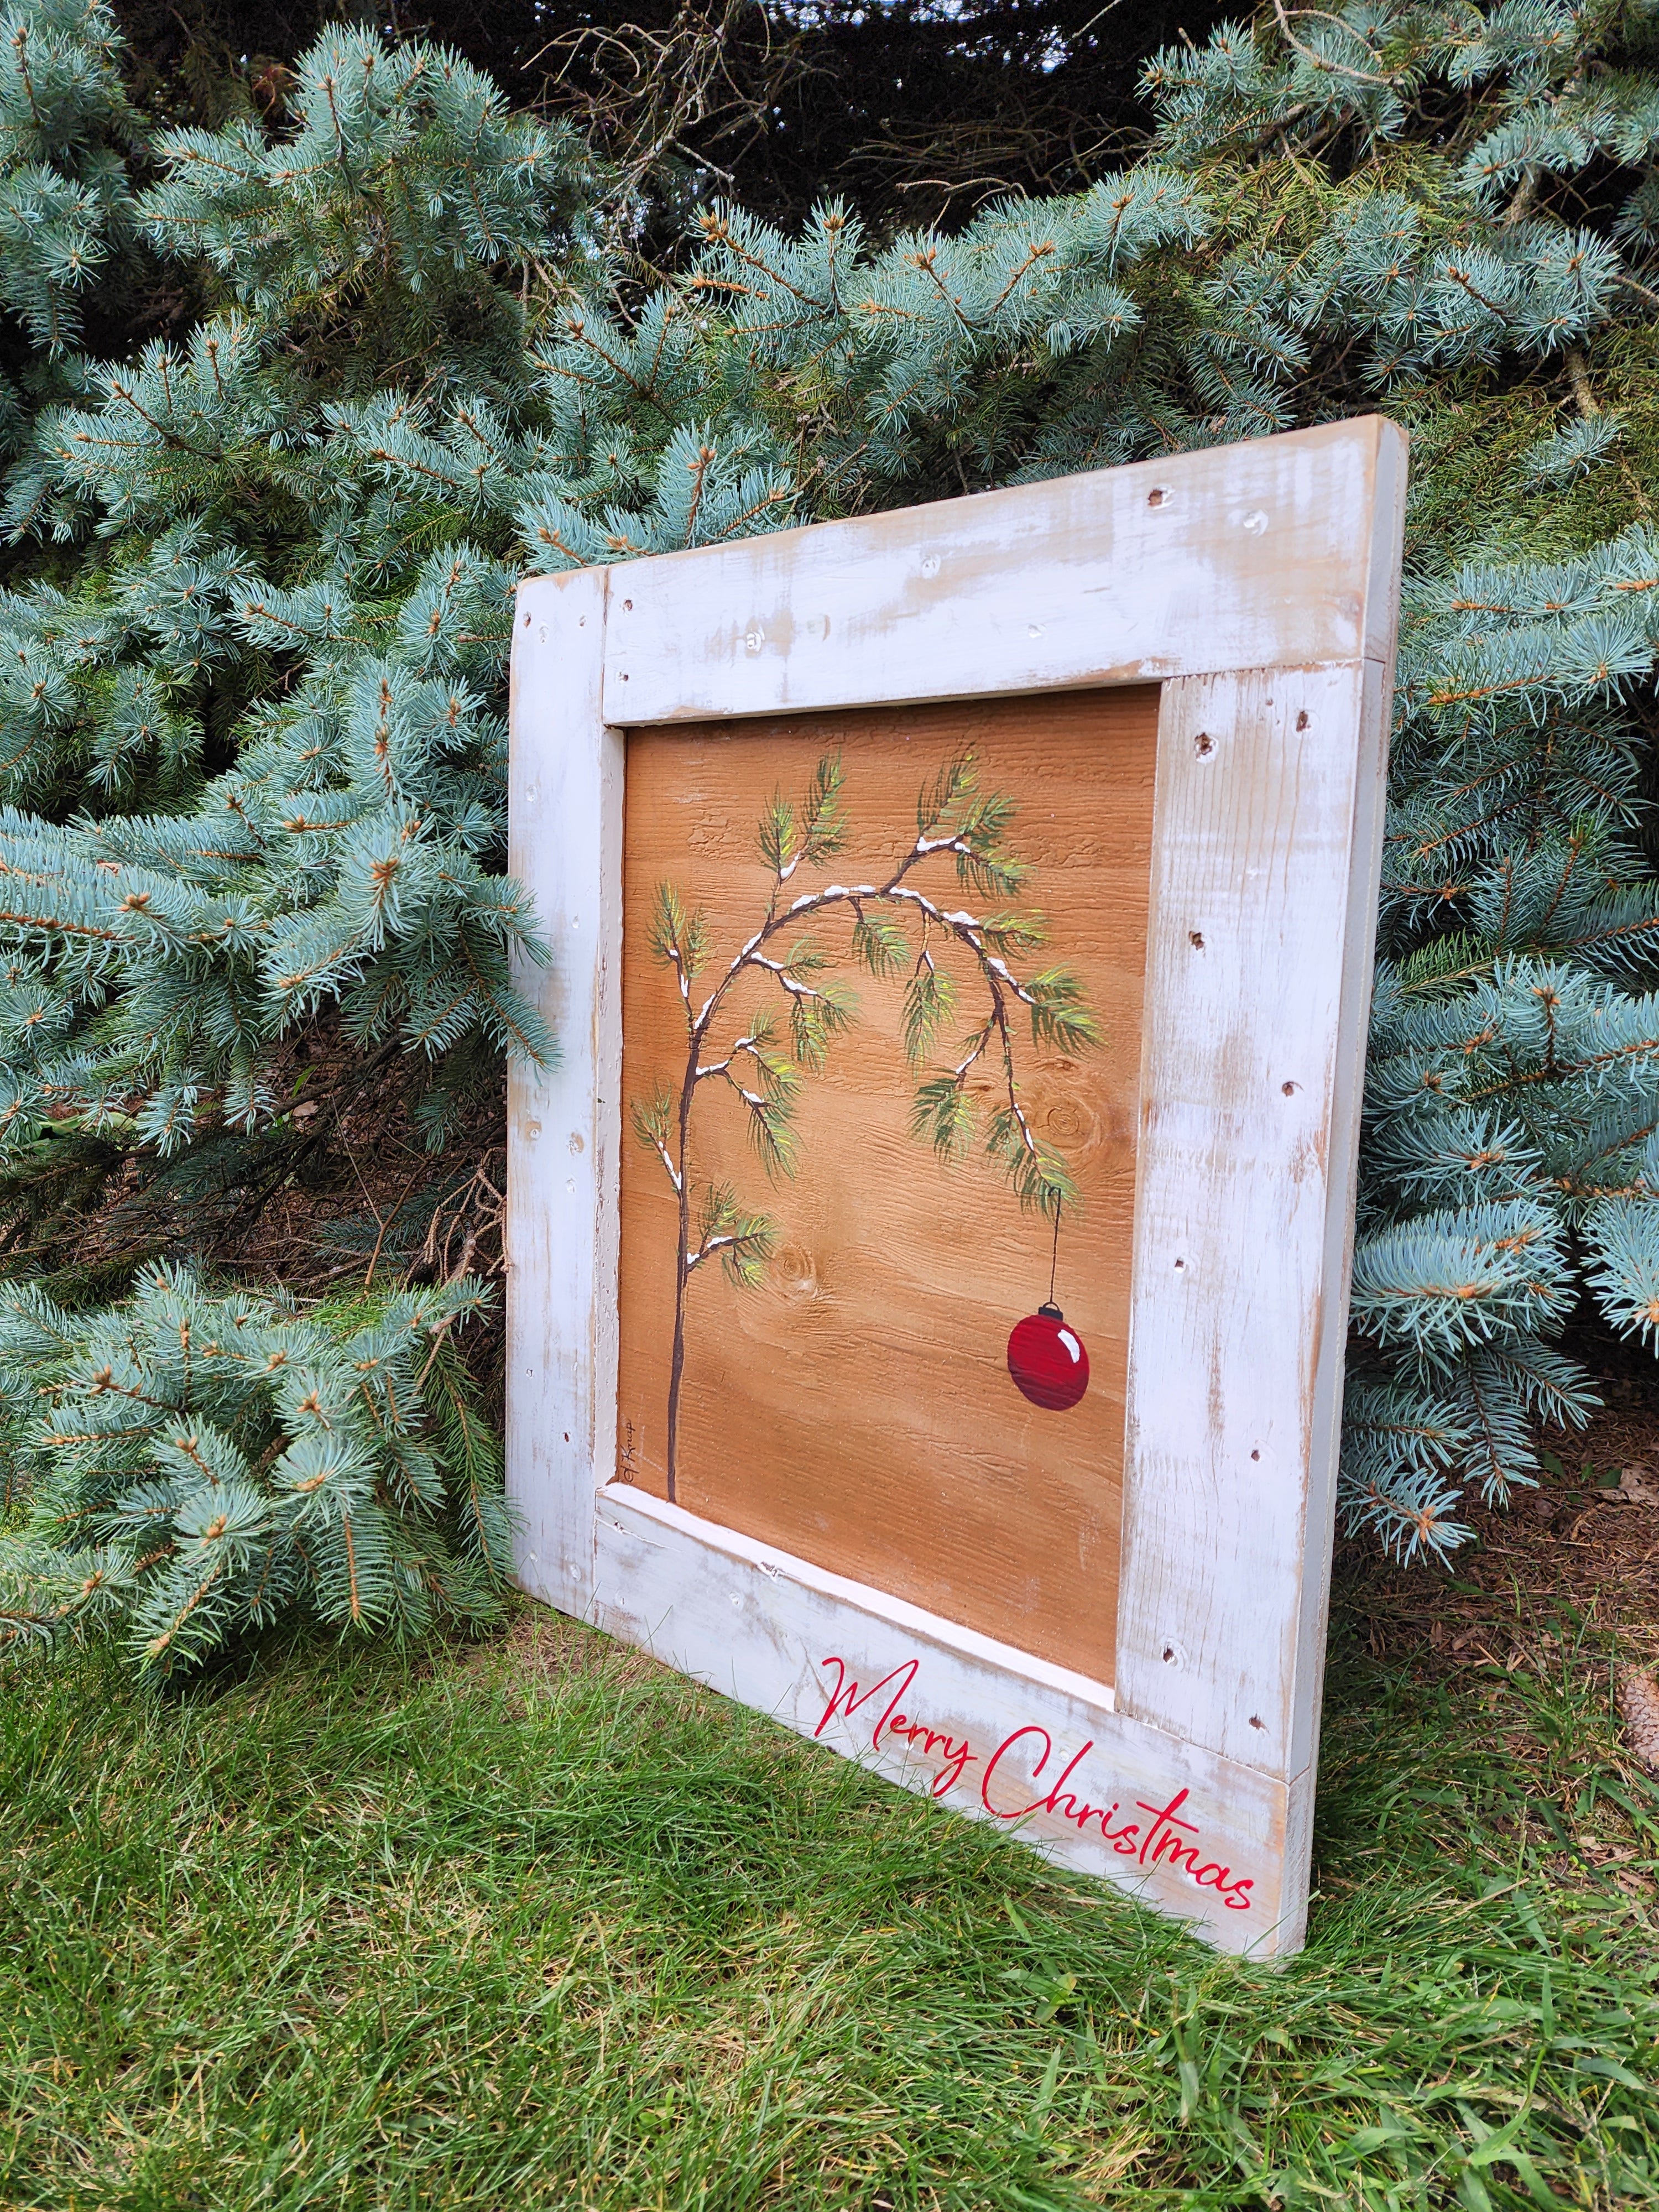 Hand painted Charlie Brown Christmas tree on recycled pallet wood, Red Merry Christmas word sign, classic red Christmas bulb, Aged white, frame